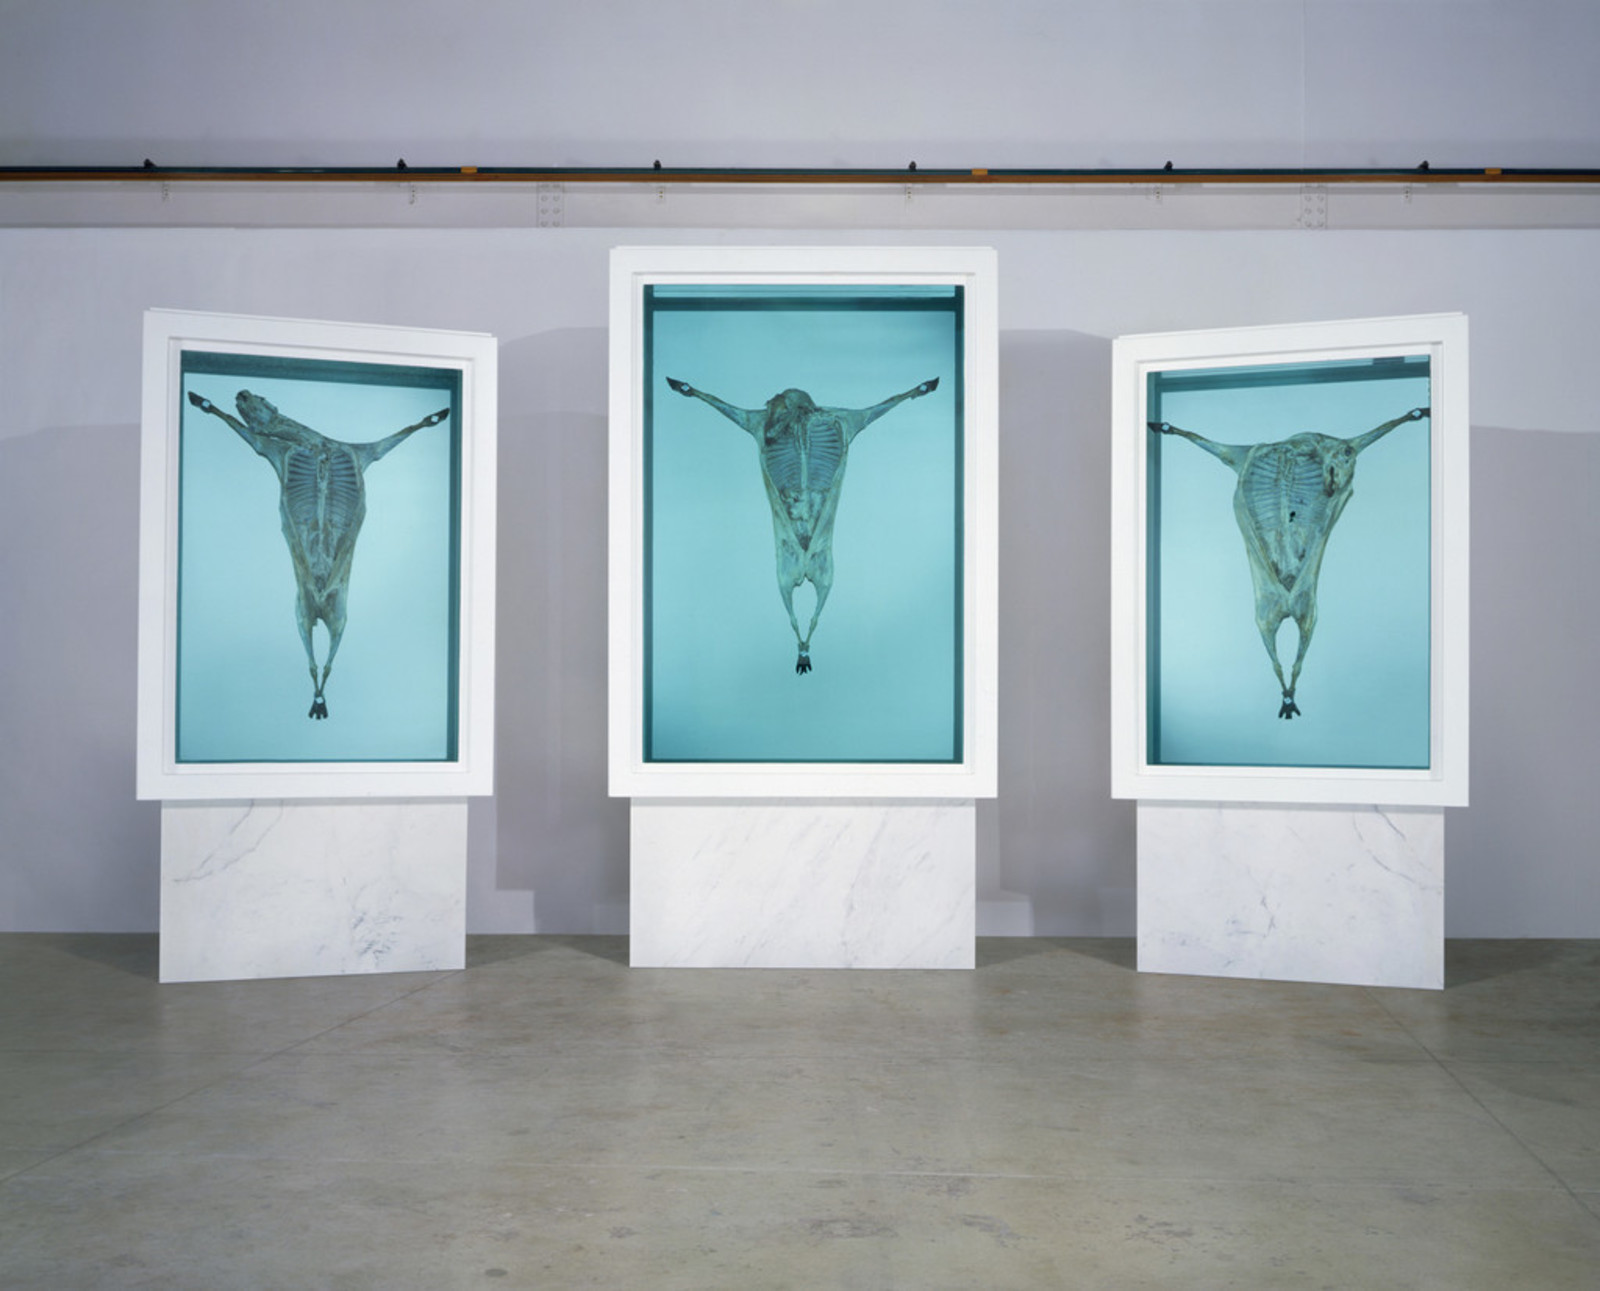 Damien Hirst. God Alone Knows. 2007. Glass, painted stainless steel, silicone, mirror, stainless steel, plastic cable ties, sheep and formaldehyde solution with steel and Carrara marble plinths. Triptych: 325 x 171 x 61 сm (left), 380,5 x 201 x 61 сm (centre), 325 x 171 x 61 mm (right). The Astrup Fearnley Museum of Modern Art, Oslo